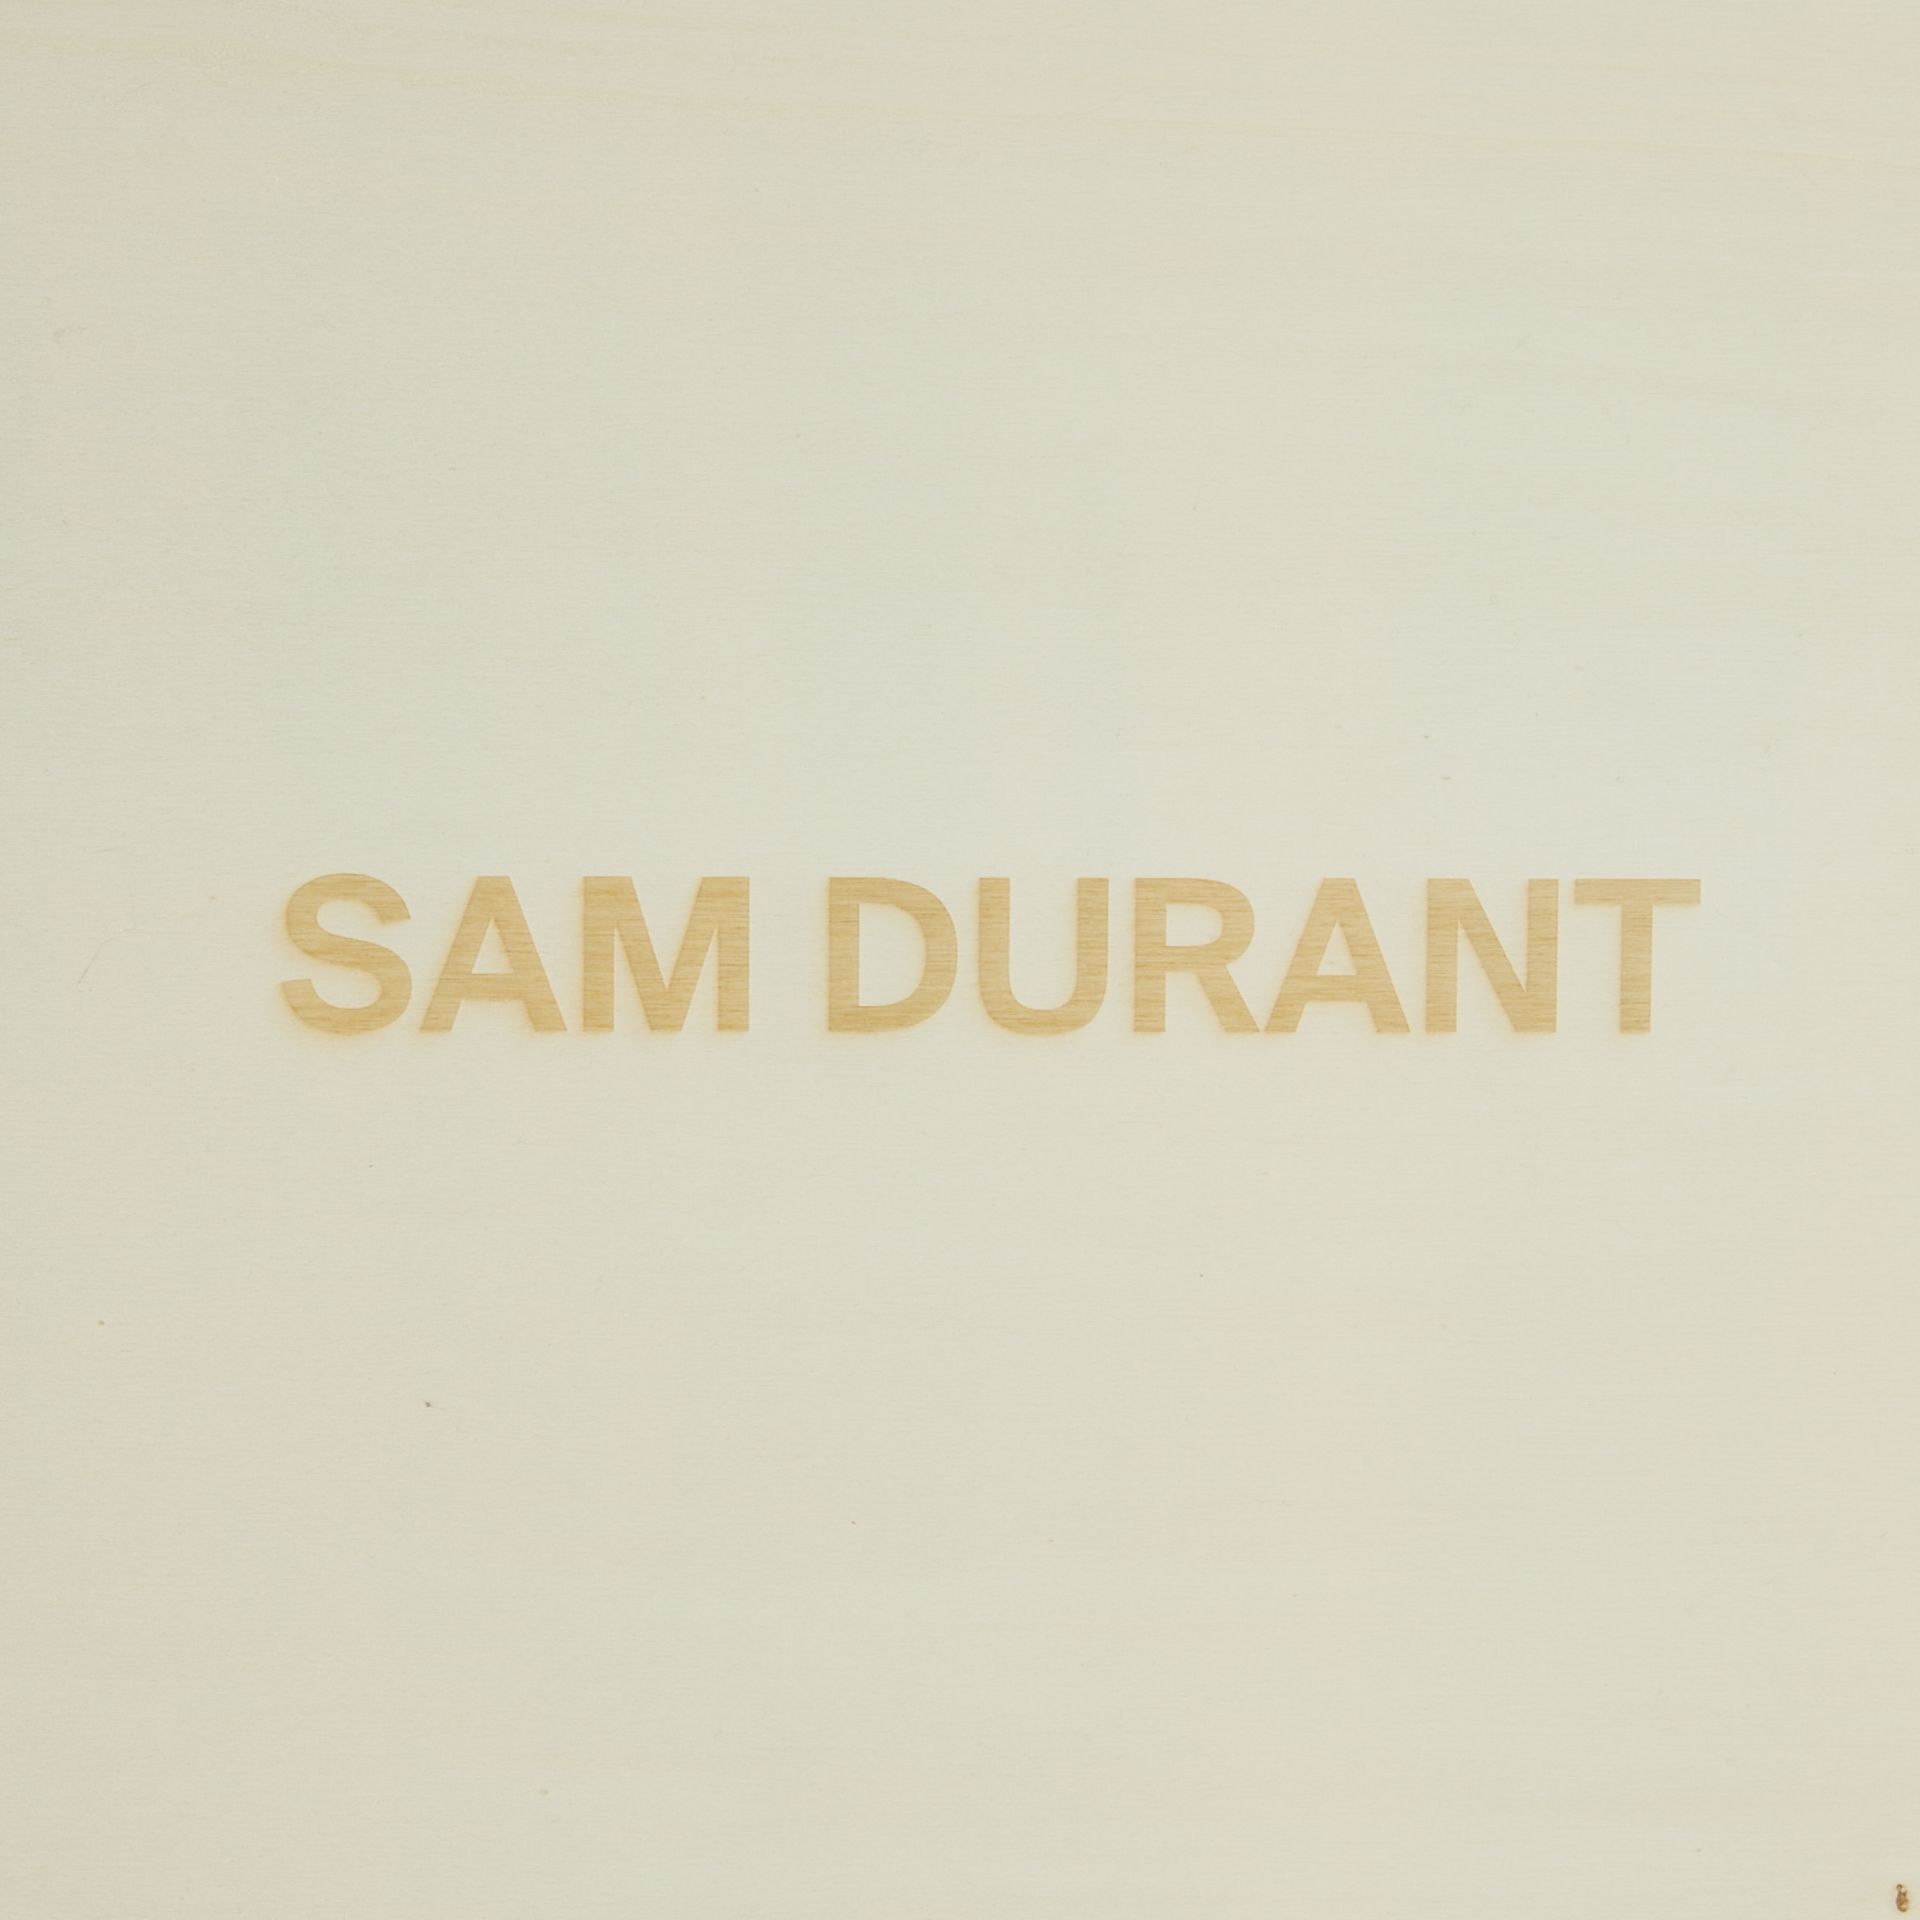 Sam Durant "Tell It Like It Is" Electric Sign 2020 - Image 10 of 11